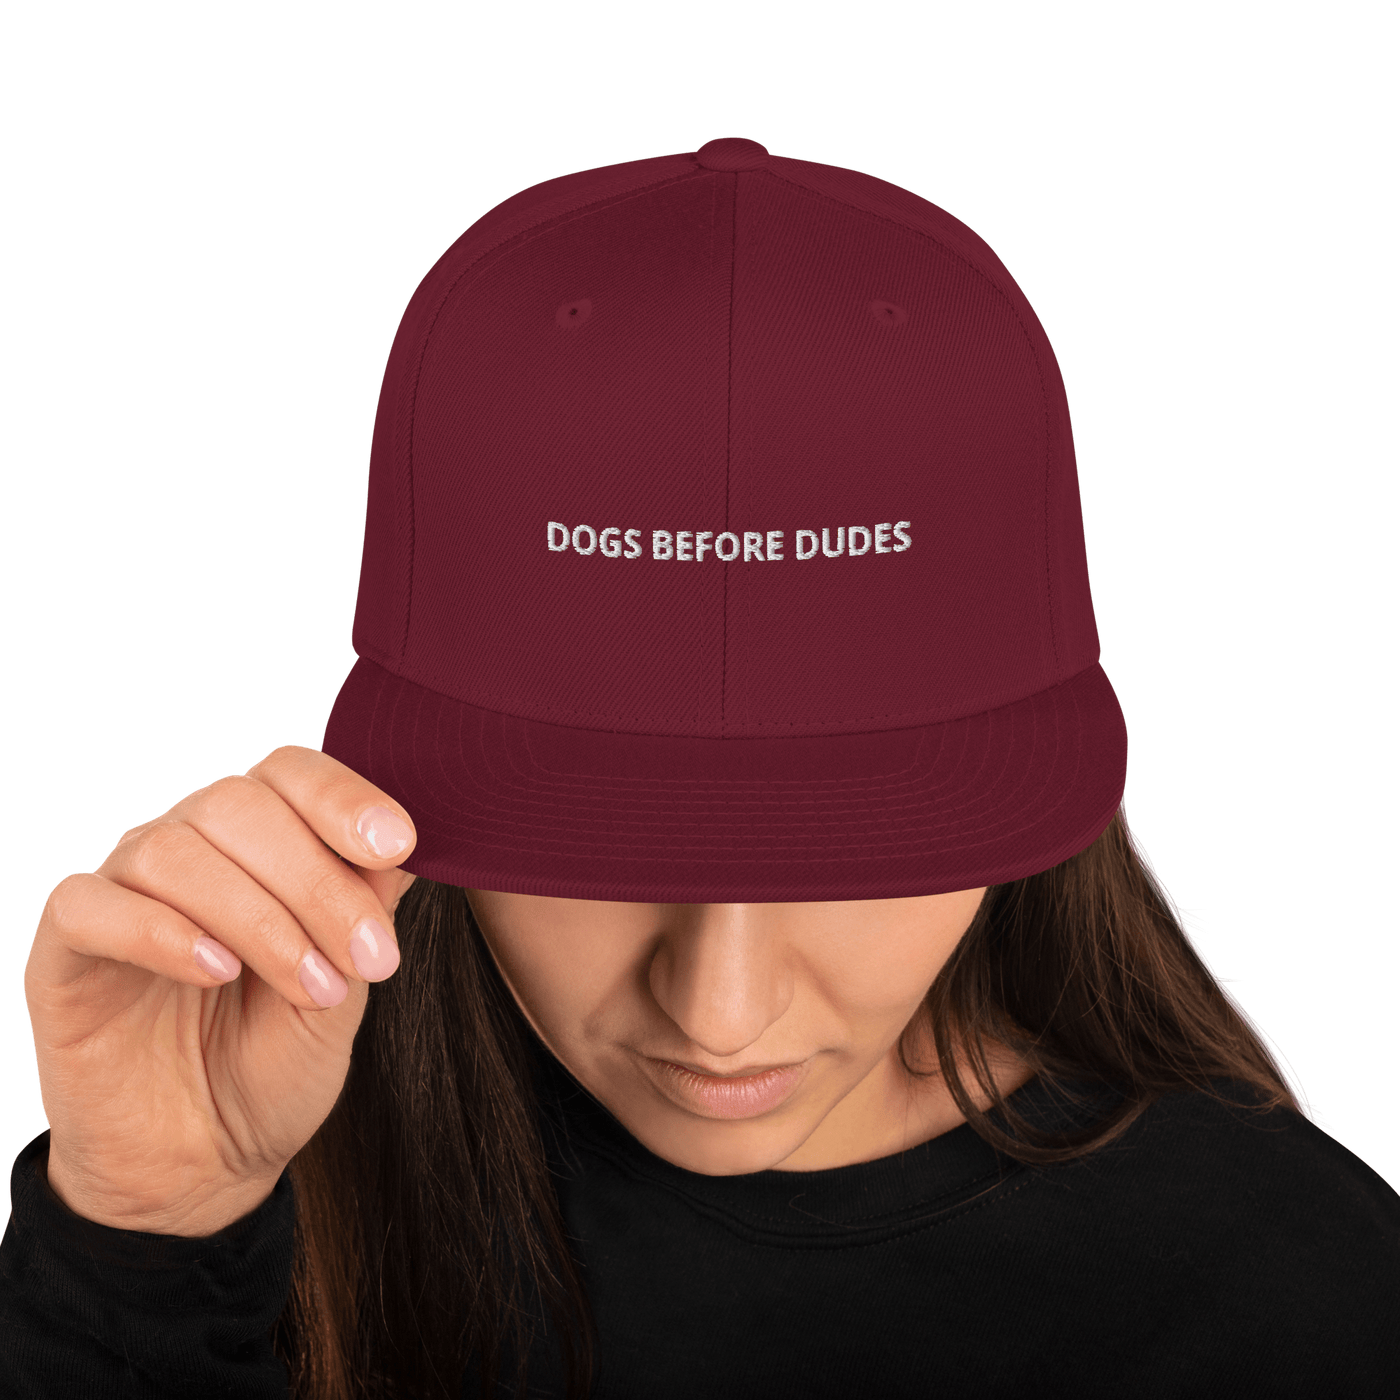 Dogs before Dudes Snapback Hat - Maroon - - Just Another Cap Store